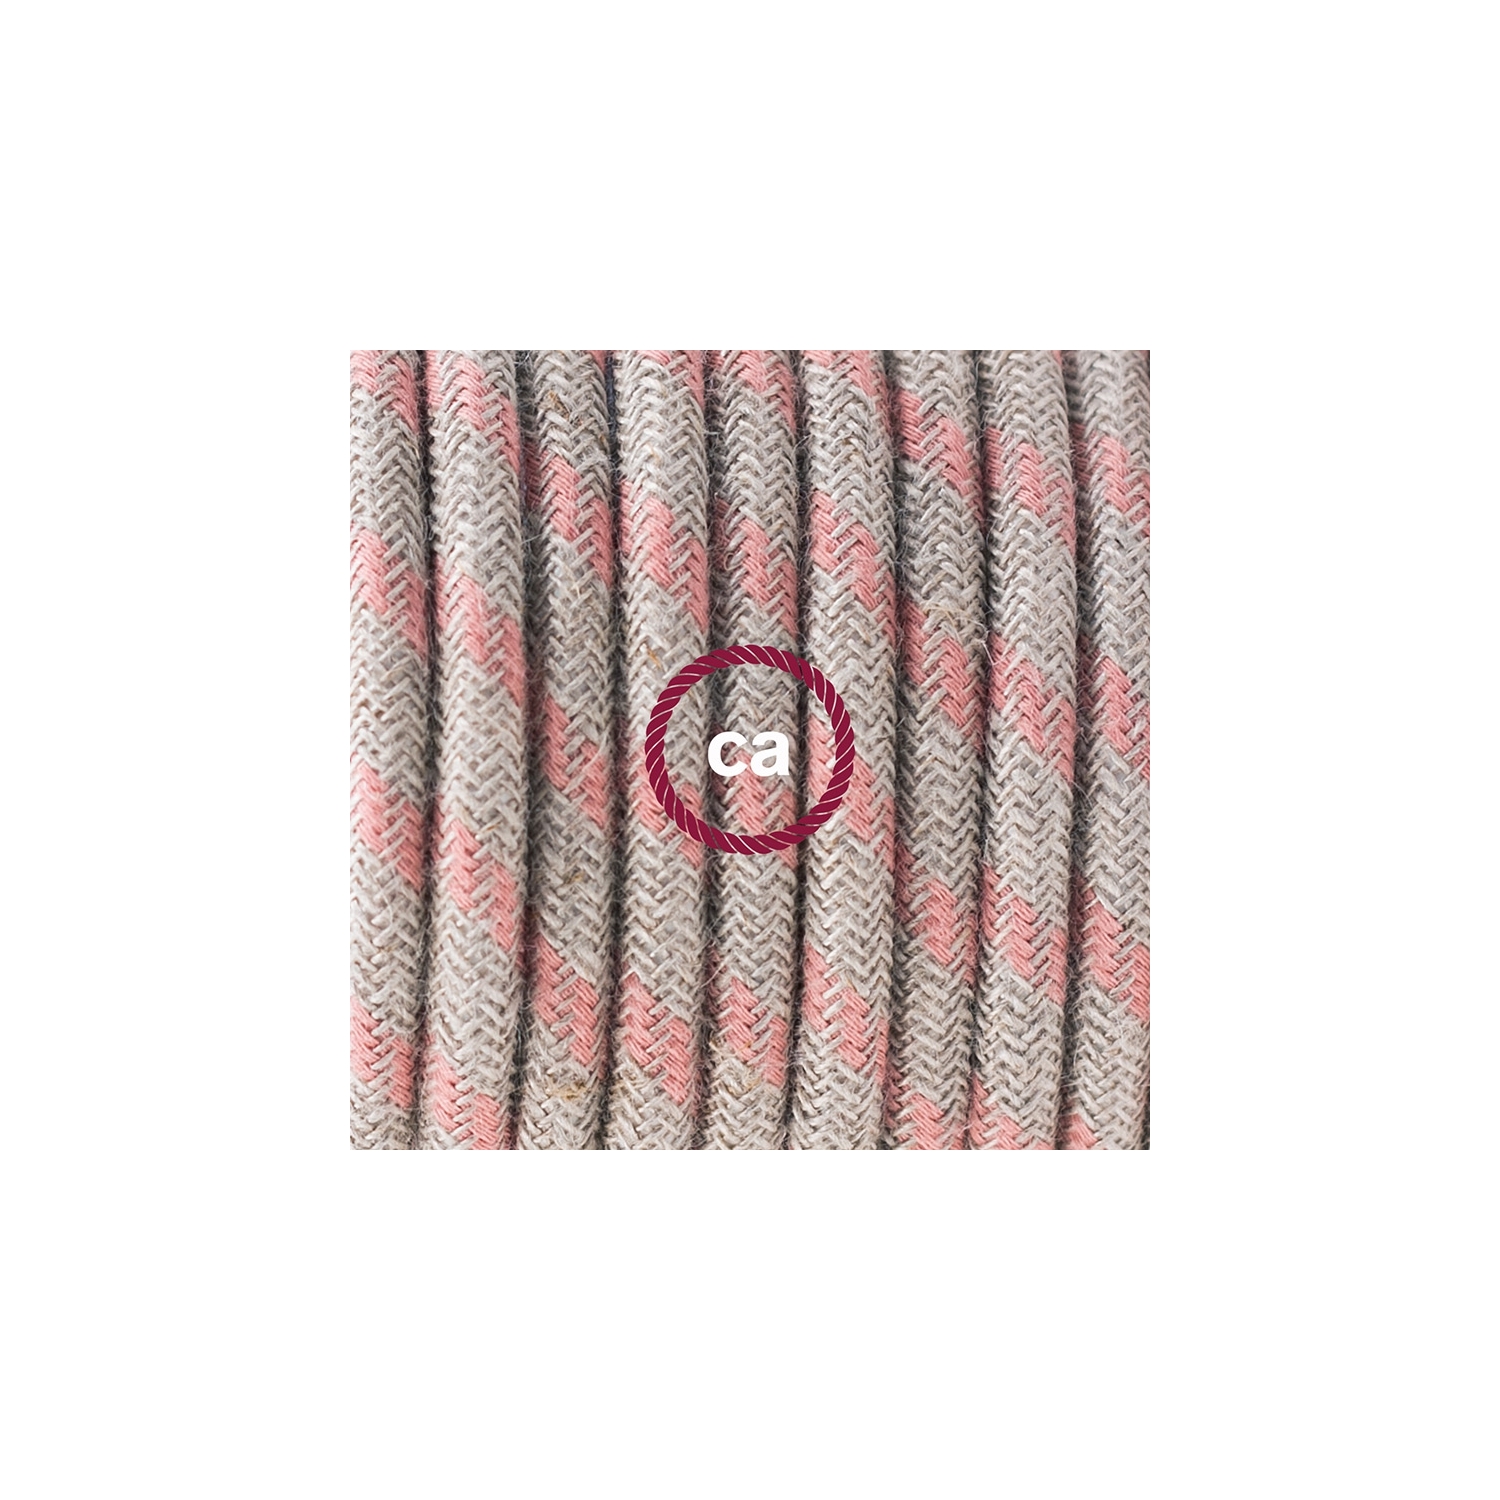 Plug-in Pendant with switch on socket | RD51 Natural & Pink Linen Stripe